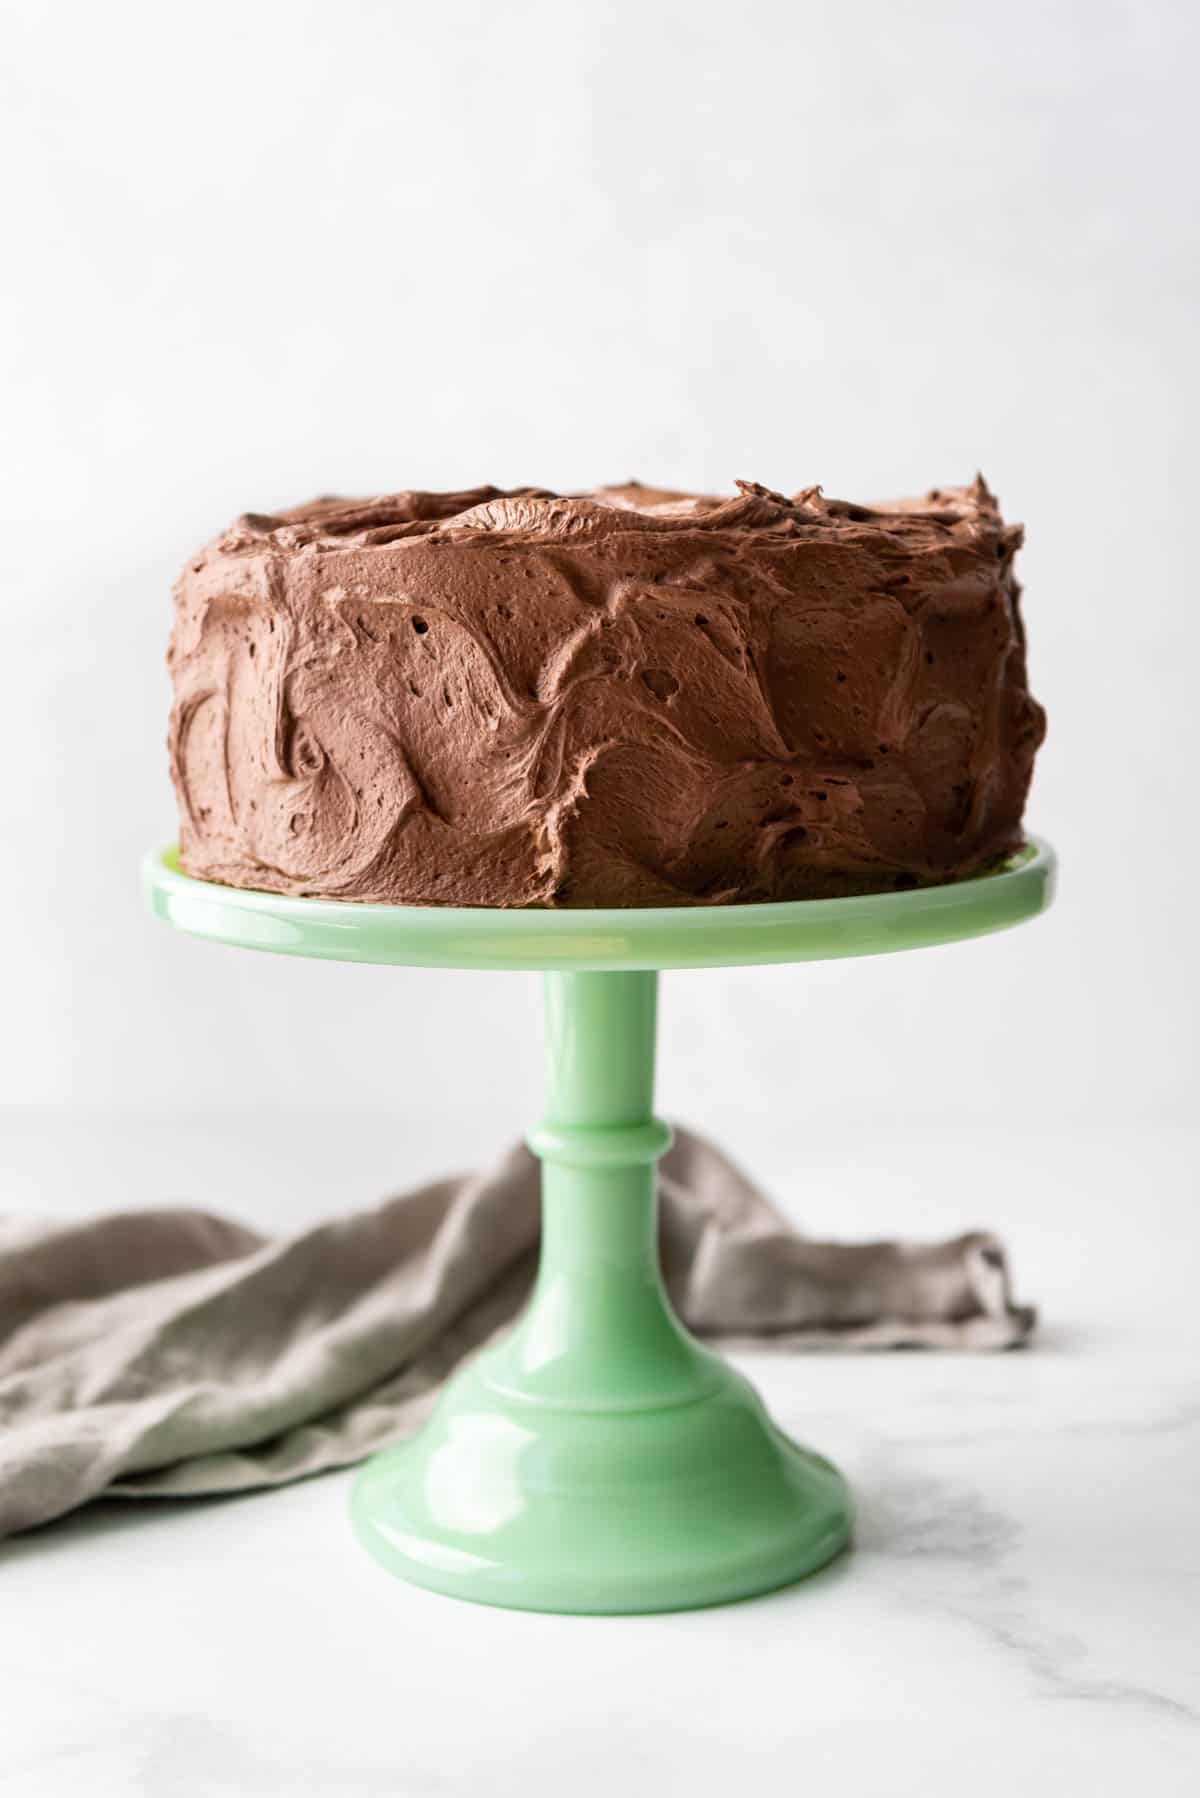 A chocolate frosted marble cake on a green cake stand.